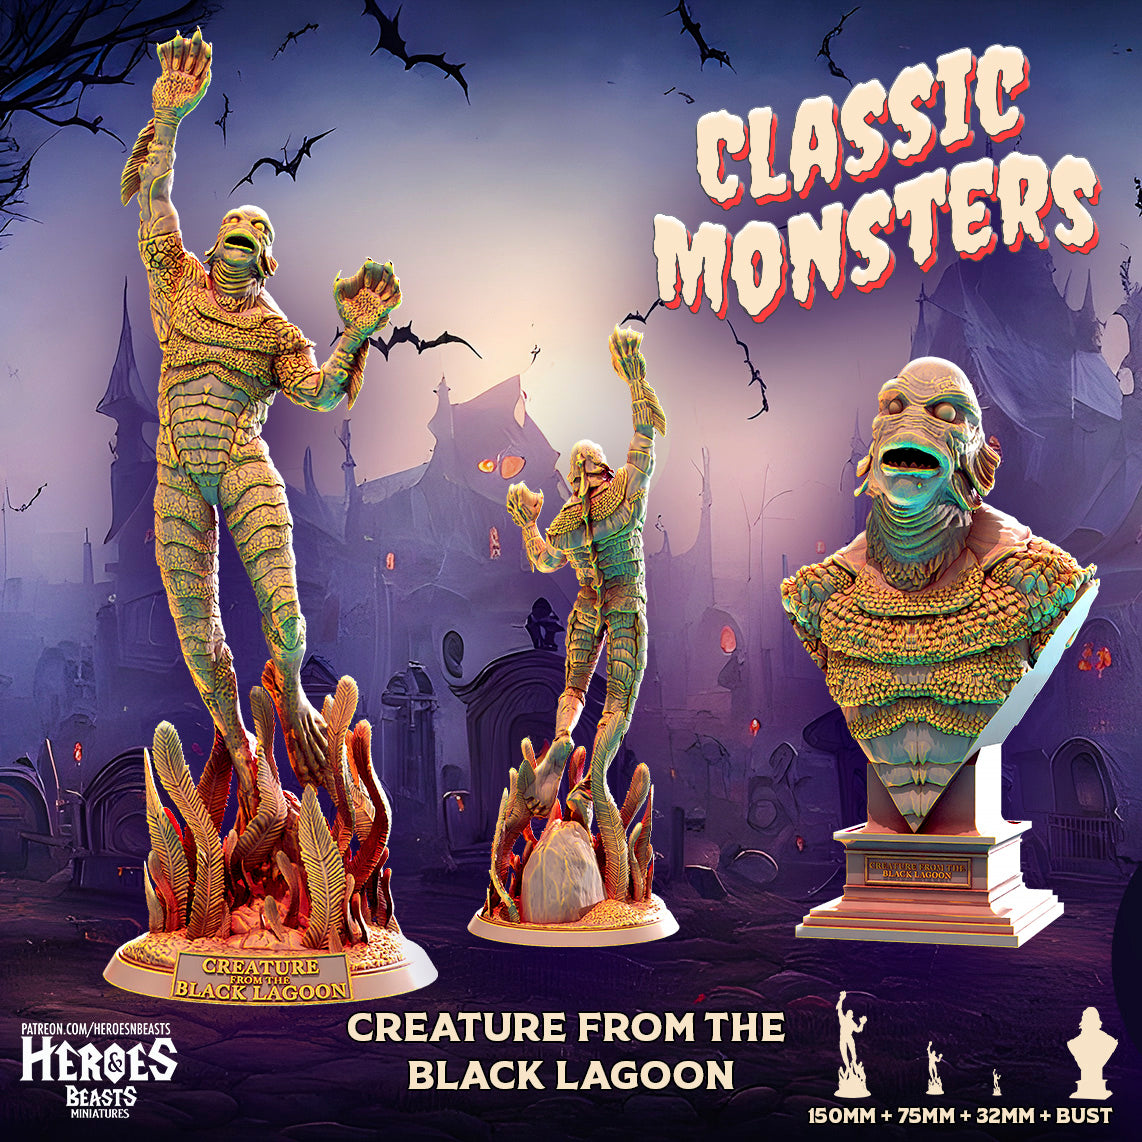 Creature from the Black Lagoon by HeroesNBeasts | Pleae Read Description